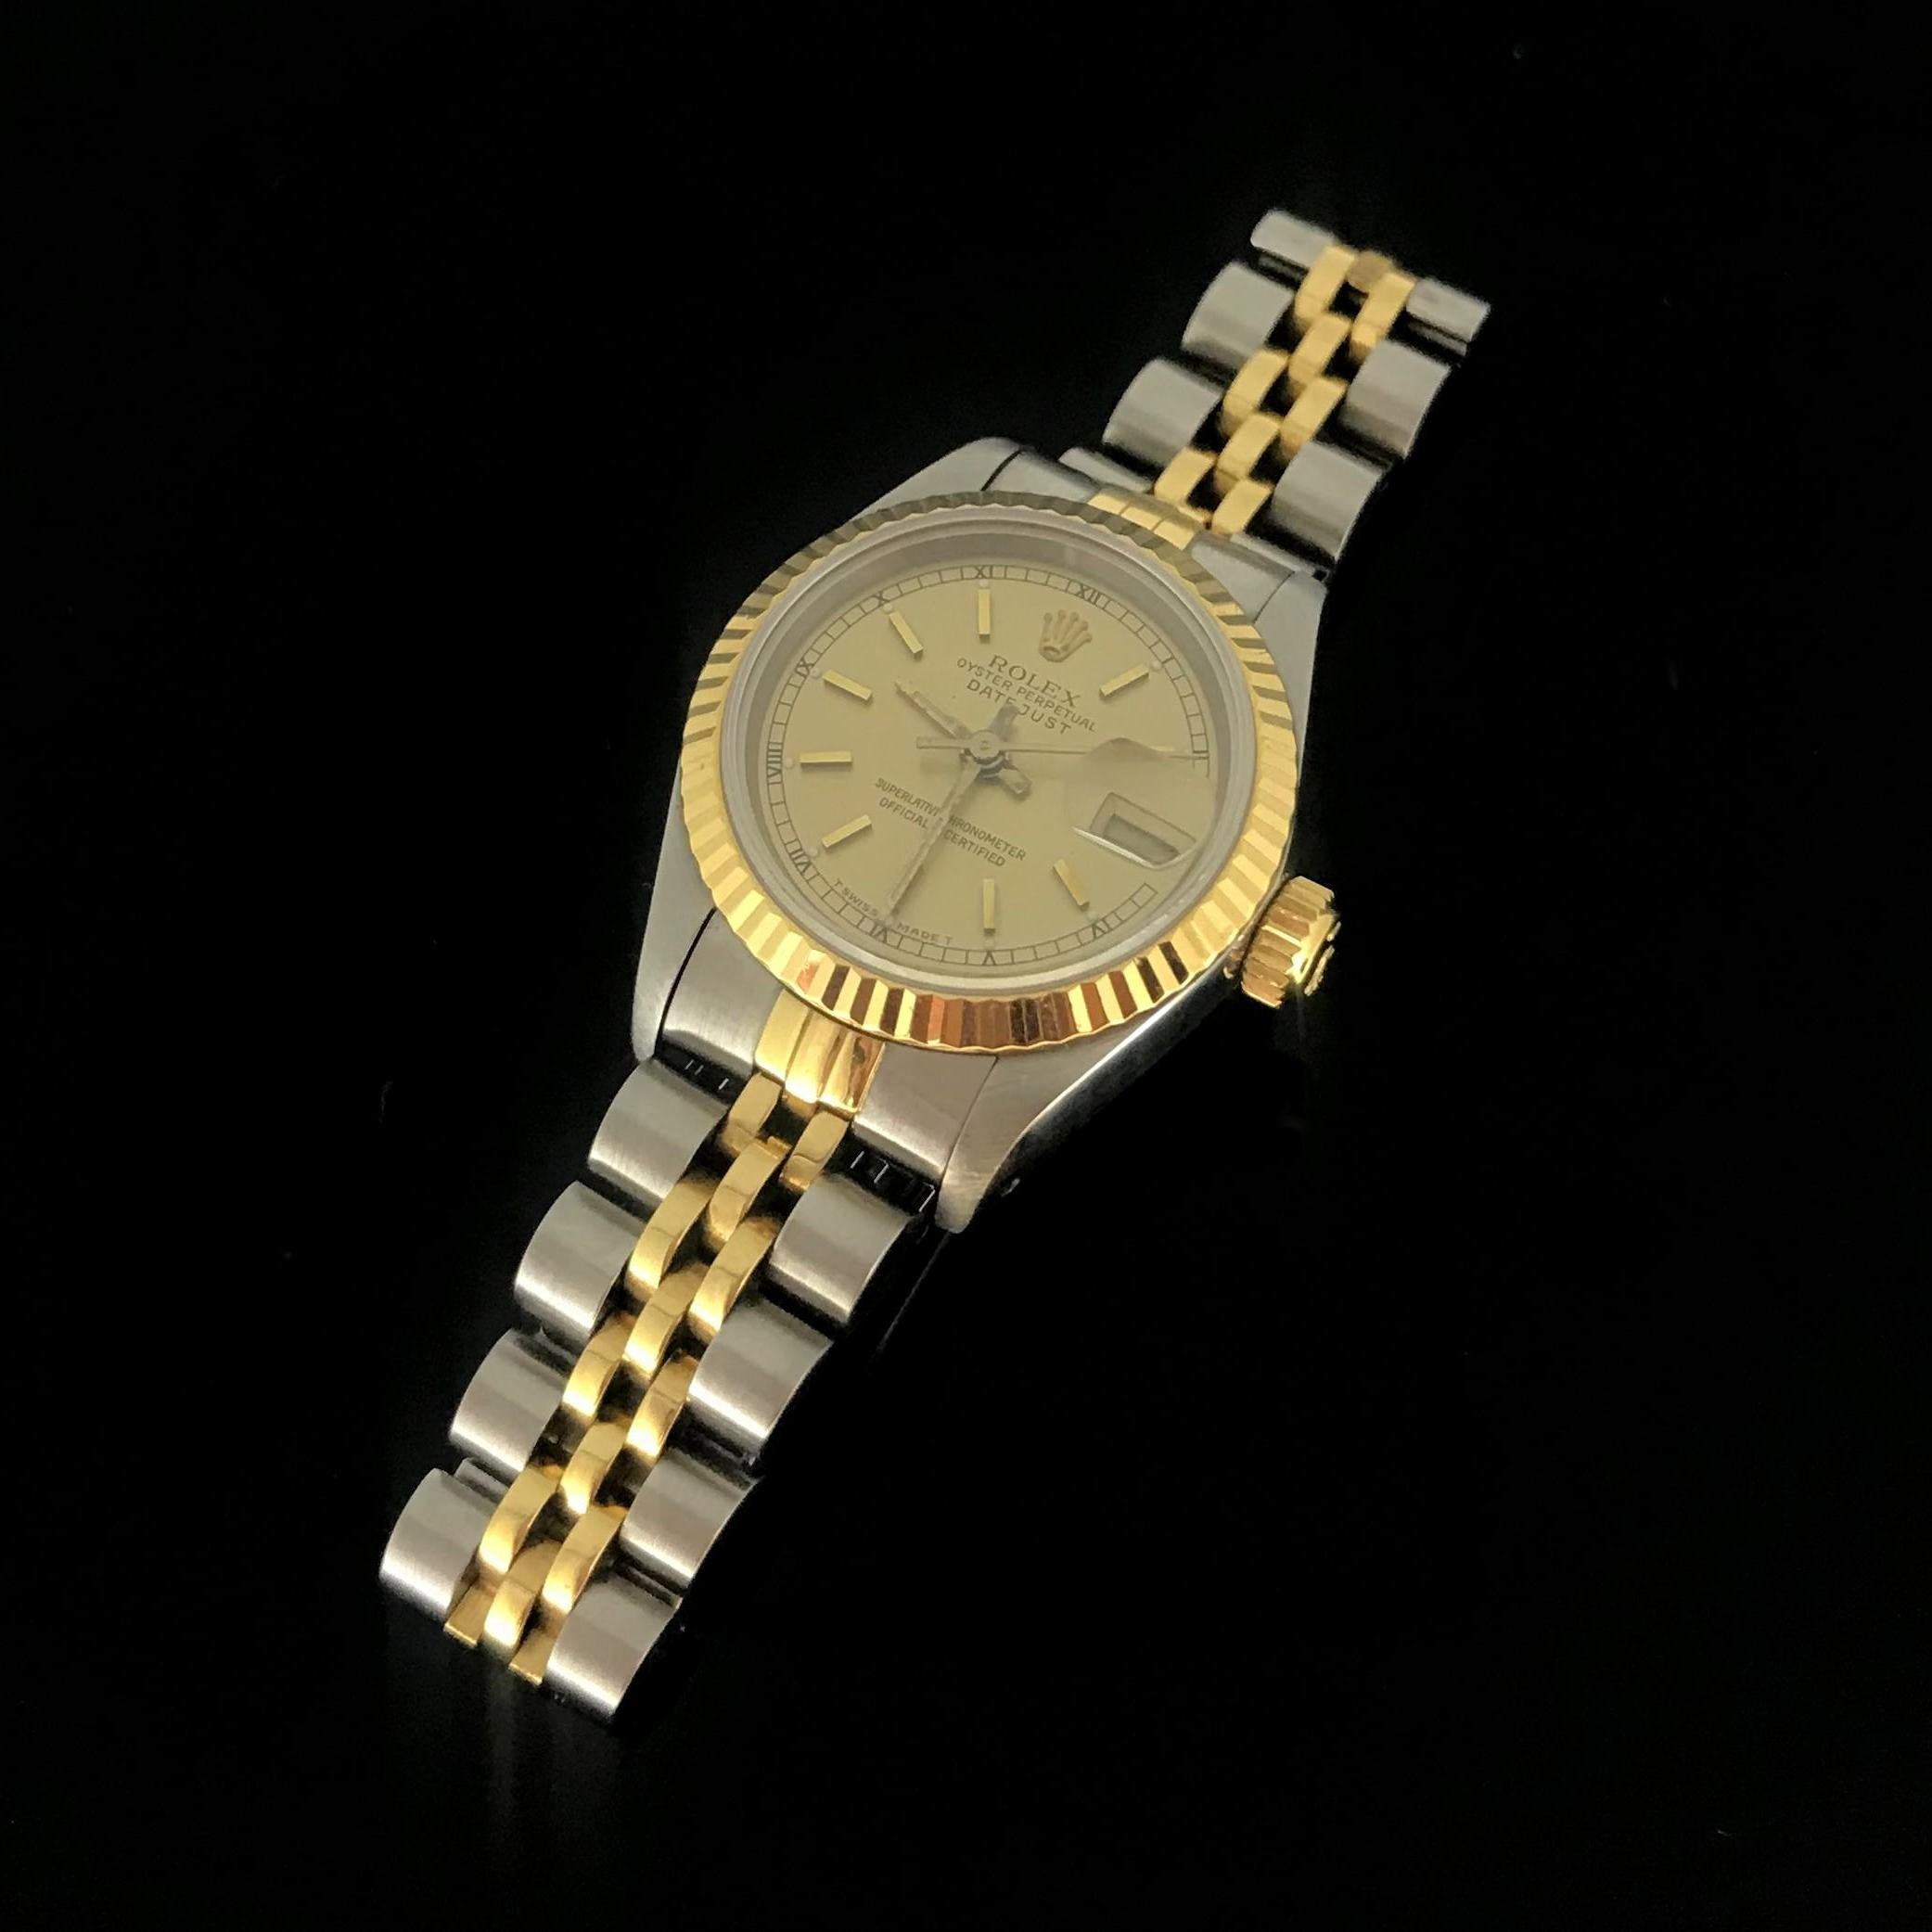 This Rolex Oyster Datejust 69000A lady's watch is made in 18K yellow gold and stainless steel. It is in very good condition and works perfectly as it was  restored. It comes with its original box and four additional Rolex strap elements.

Total